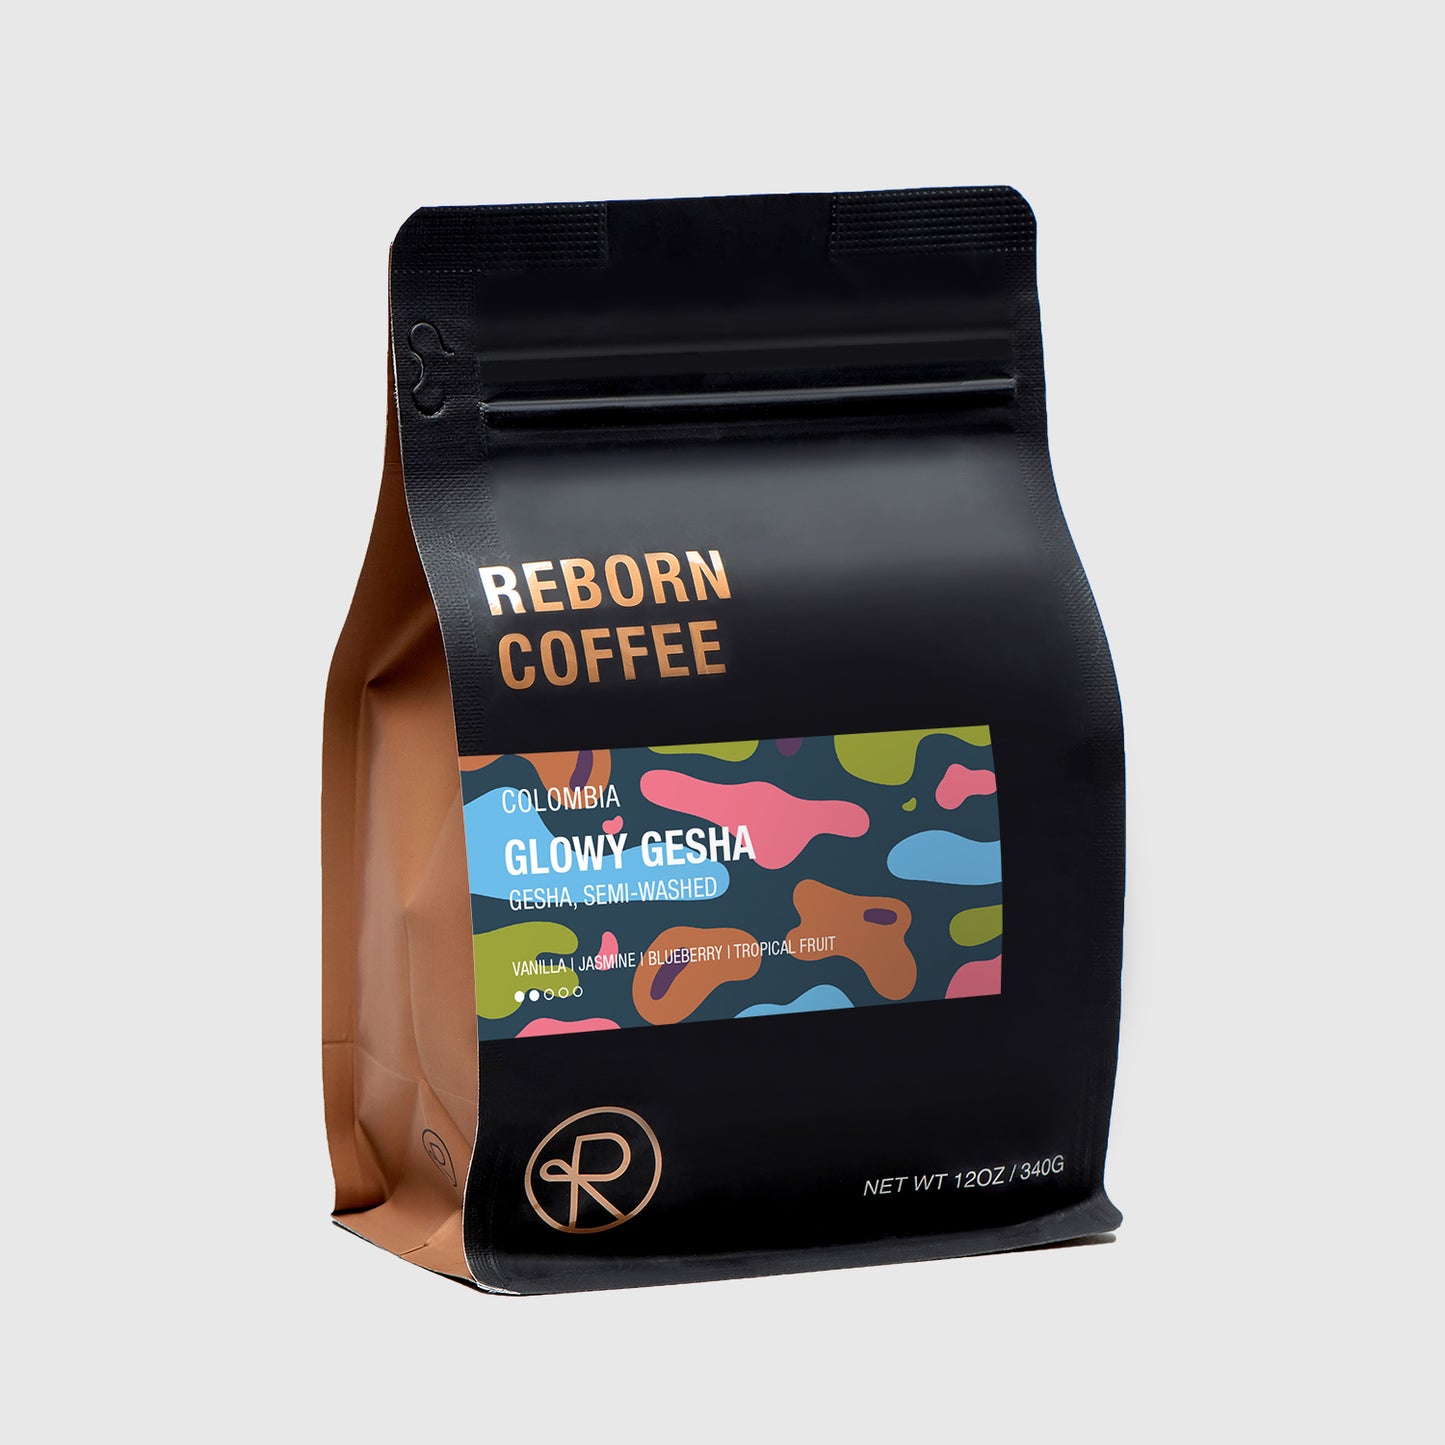 Bag with 12 ounces of Glowy Gesha Coffee beans inside. Sticker shows product information on colorful background. Front left view, 1 of 4.